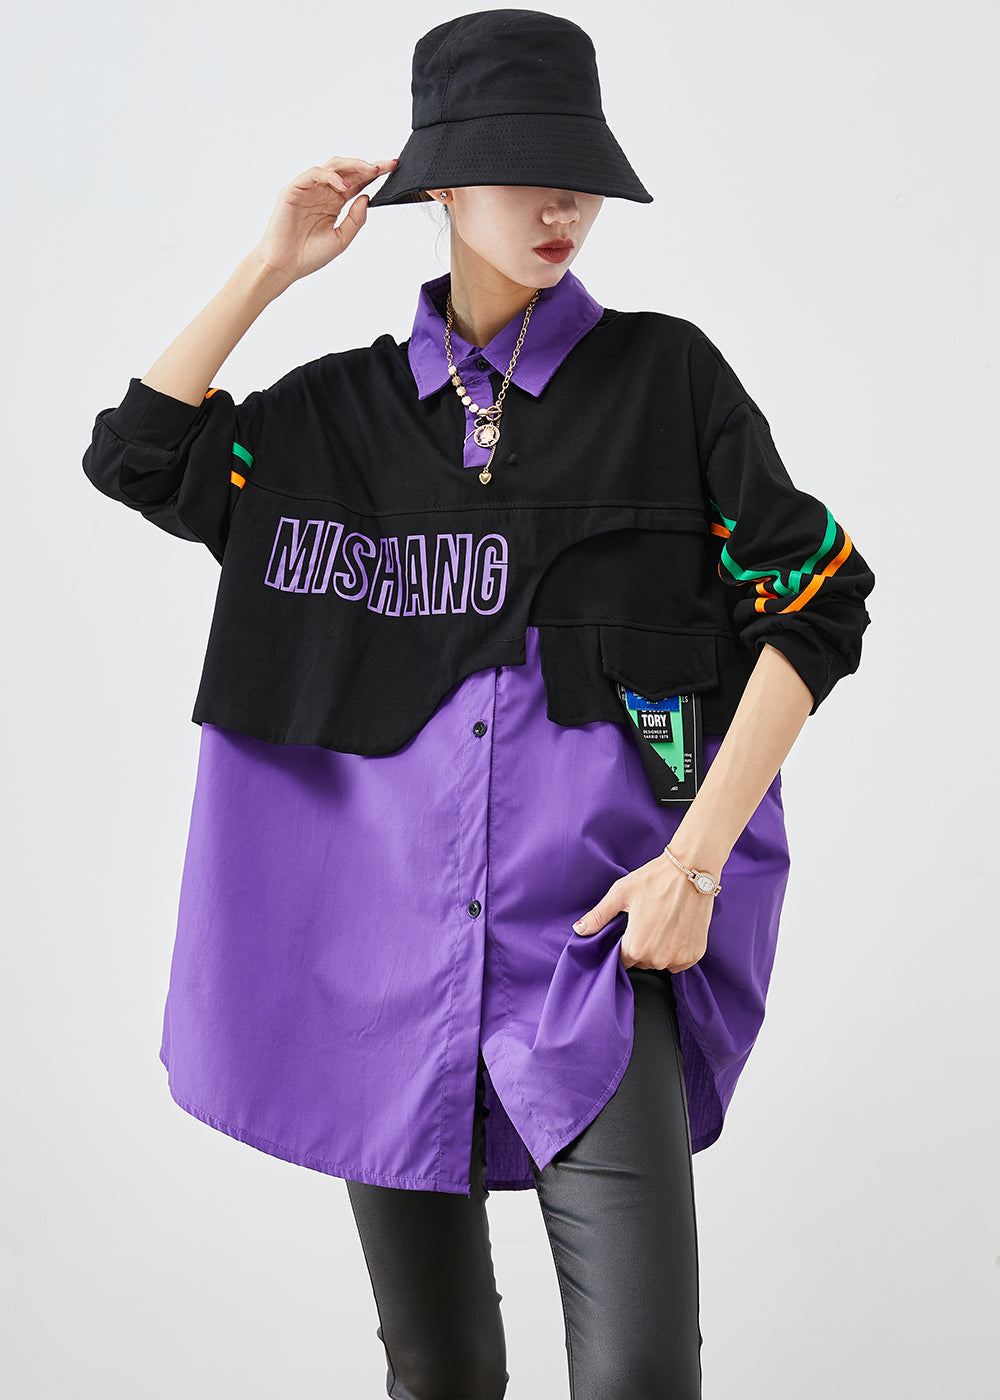 Casual Purple Oversized Patchwork Cotton Fake Two Piece Sweatshirts Top Fall